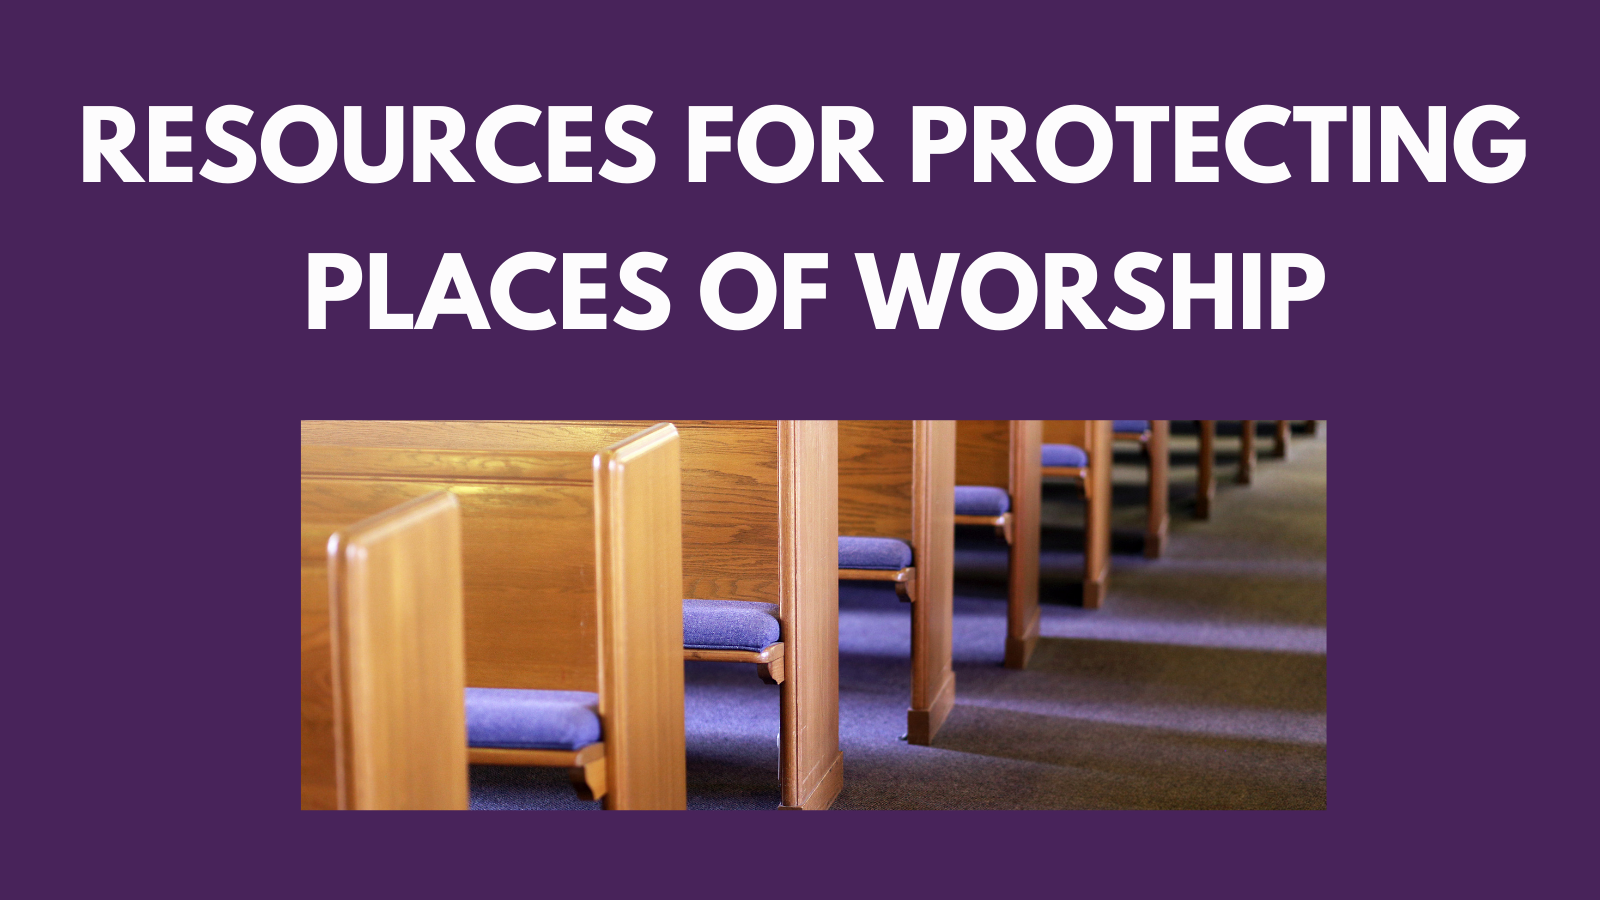 Protecting Places of Worship